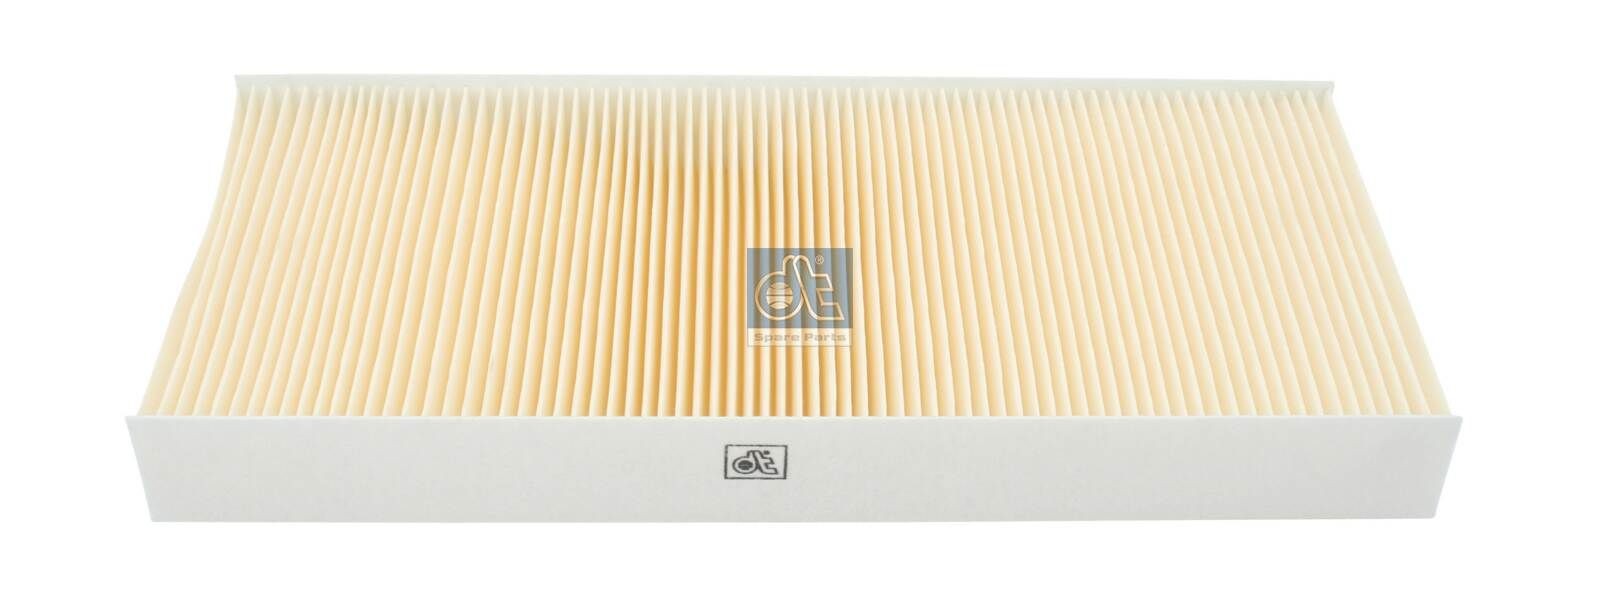 E949LI DT Spare Parts Particulate Filter, 360 mm x 160 mm x 40 mm Width: 160mm, Height: 40mm, Length: 360mm Cabin filter 3.82001 buy